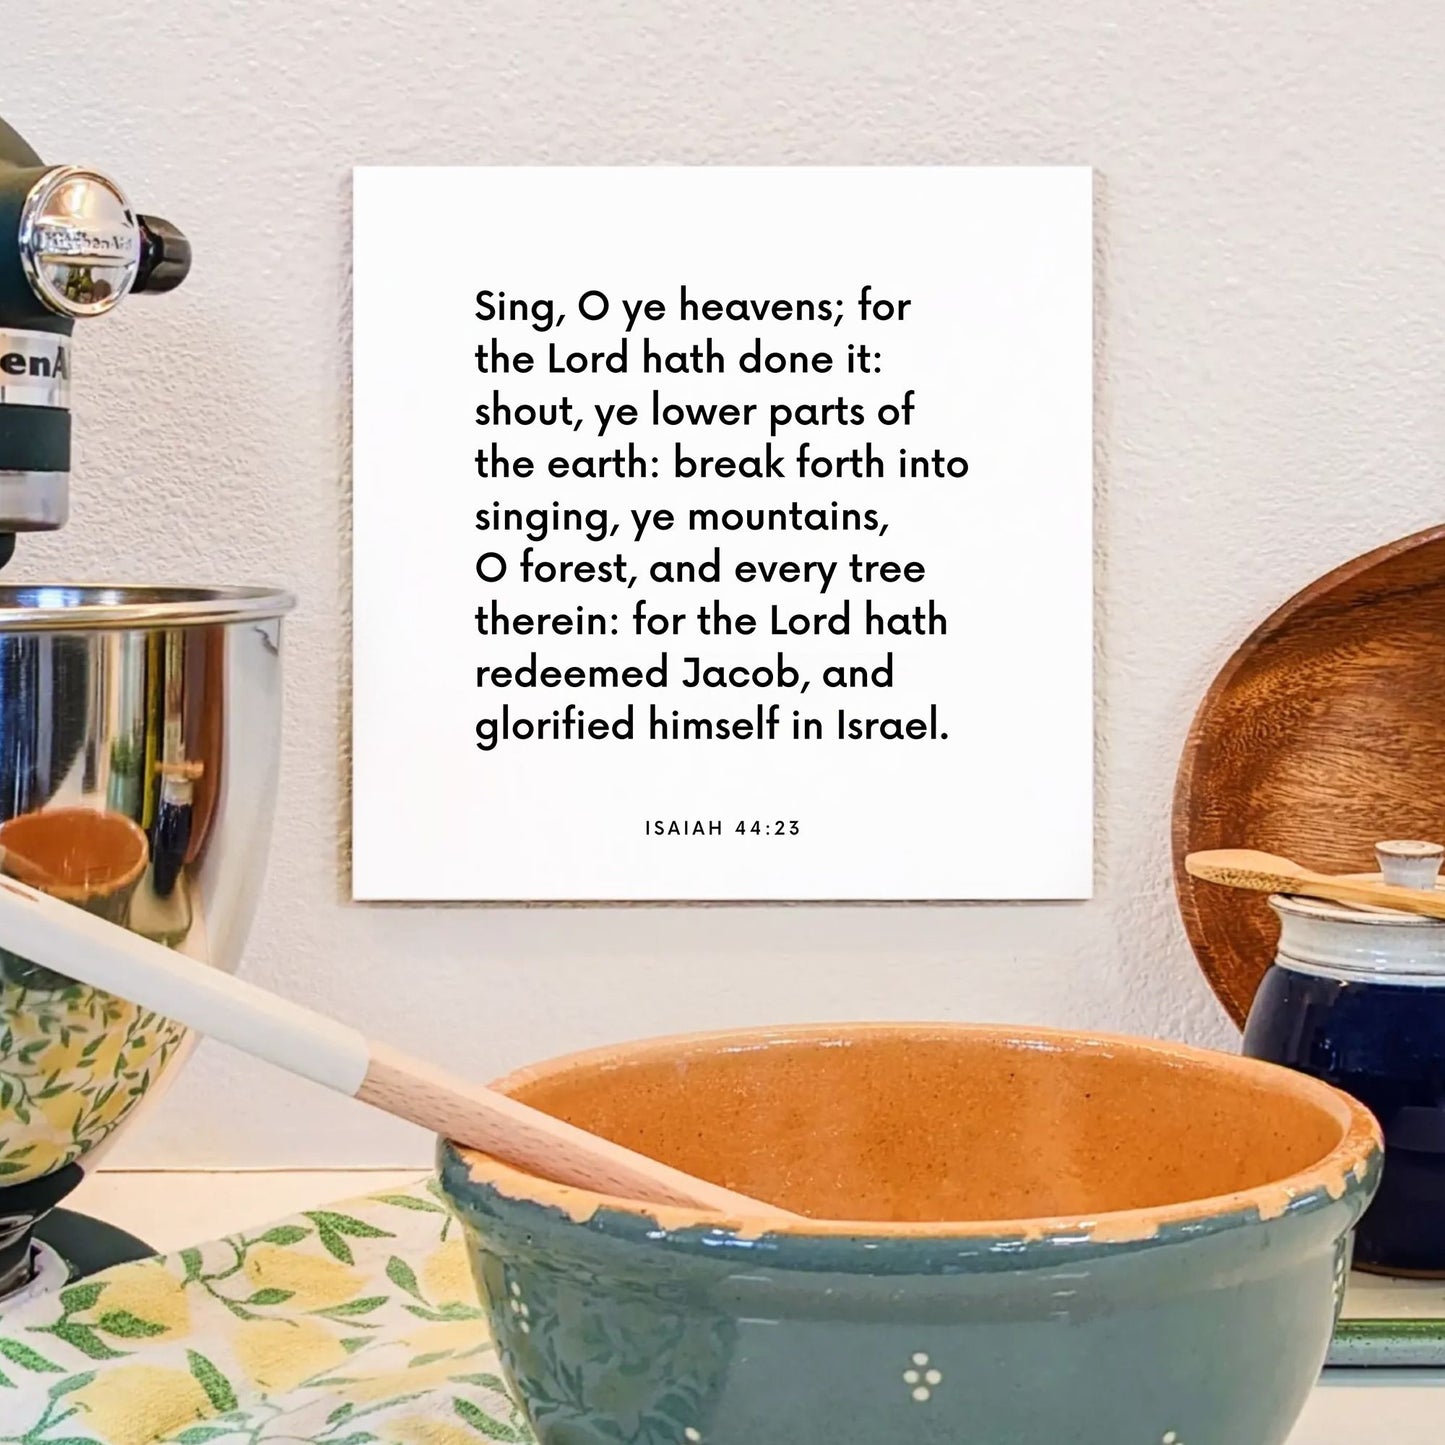 Kitchen mouting of the scripture tile for Isaiah 44:23 - "The Lord hath redeemed Jacob, and glorified himself in Israel"